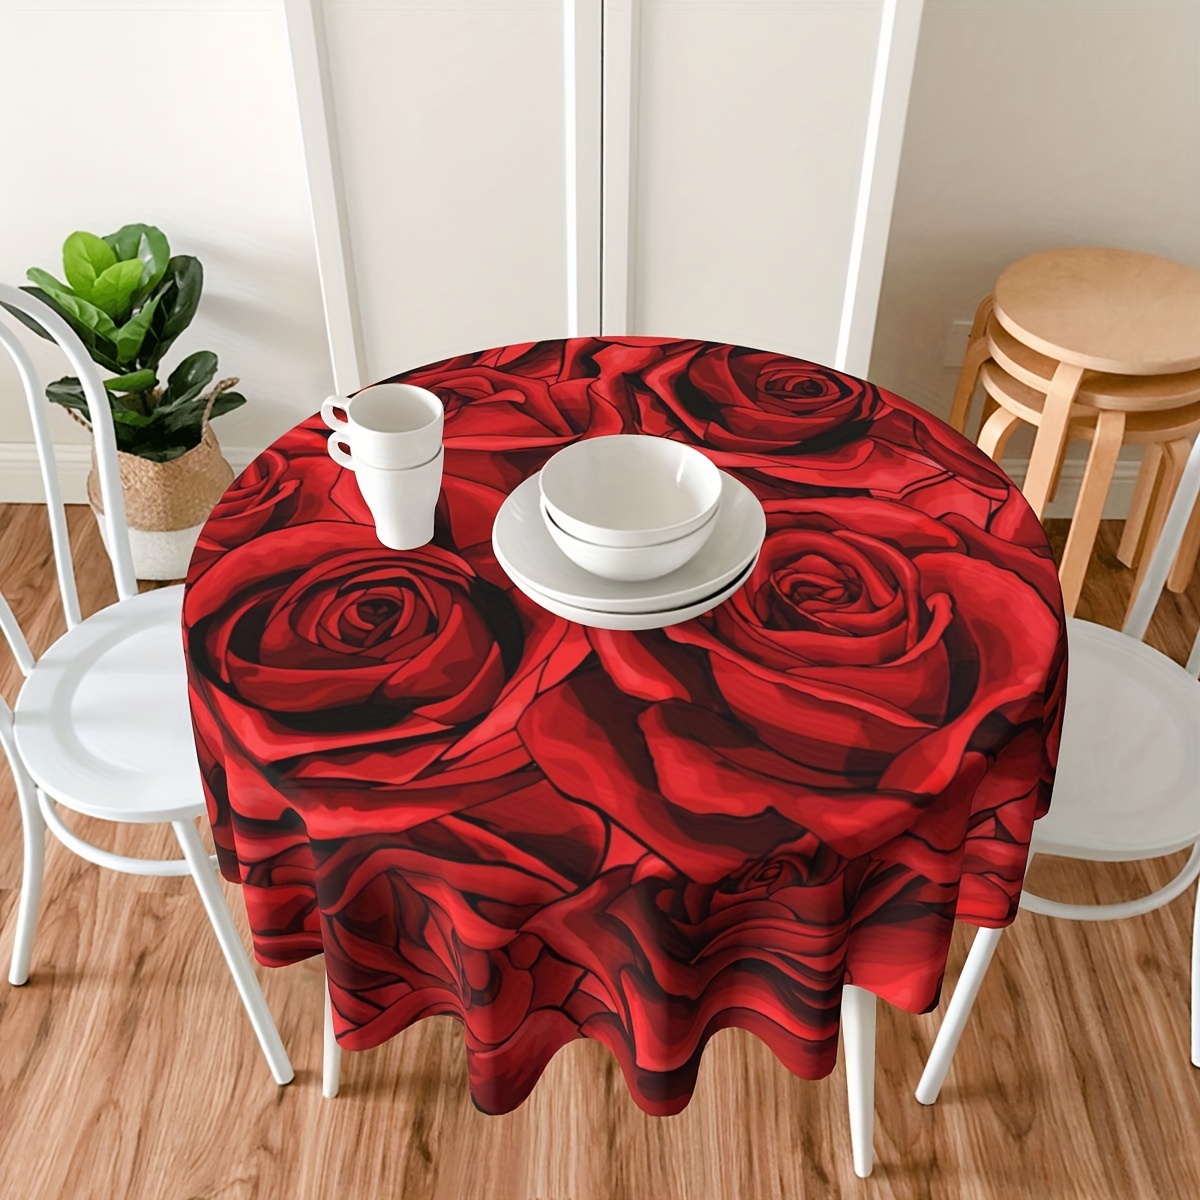 

Vibrant Red Rose Round Tablecloth - Handcrafted, Stain-resistant Polyester For Elegant Dining Decor Floral Tablecloth Oval Tablecloths For Dining Table